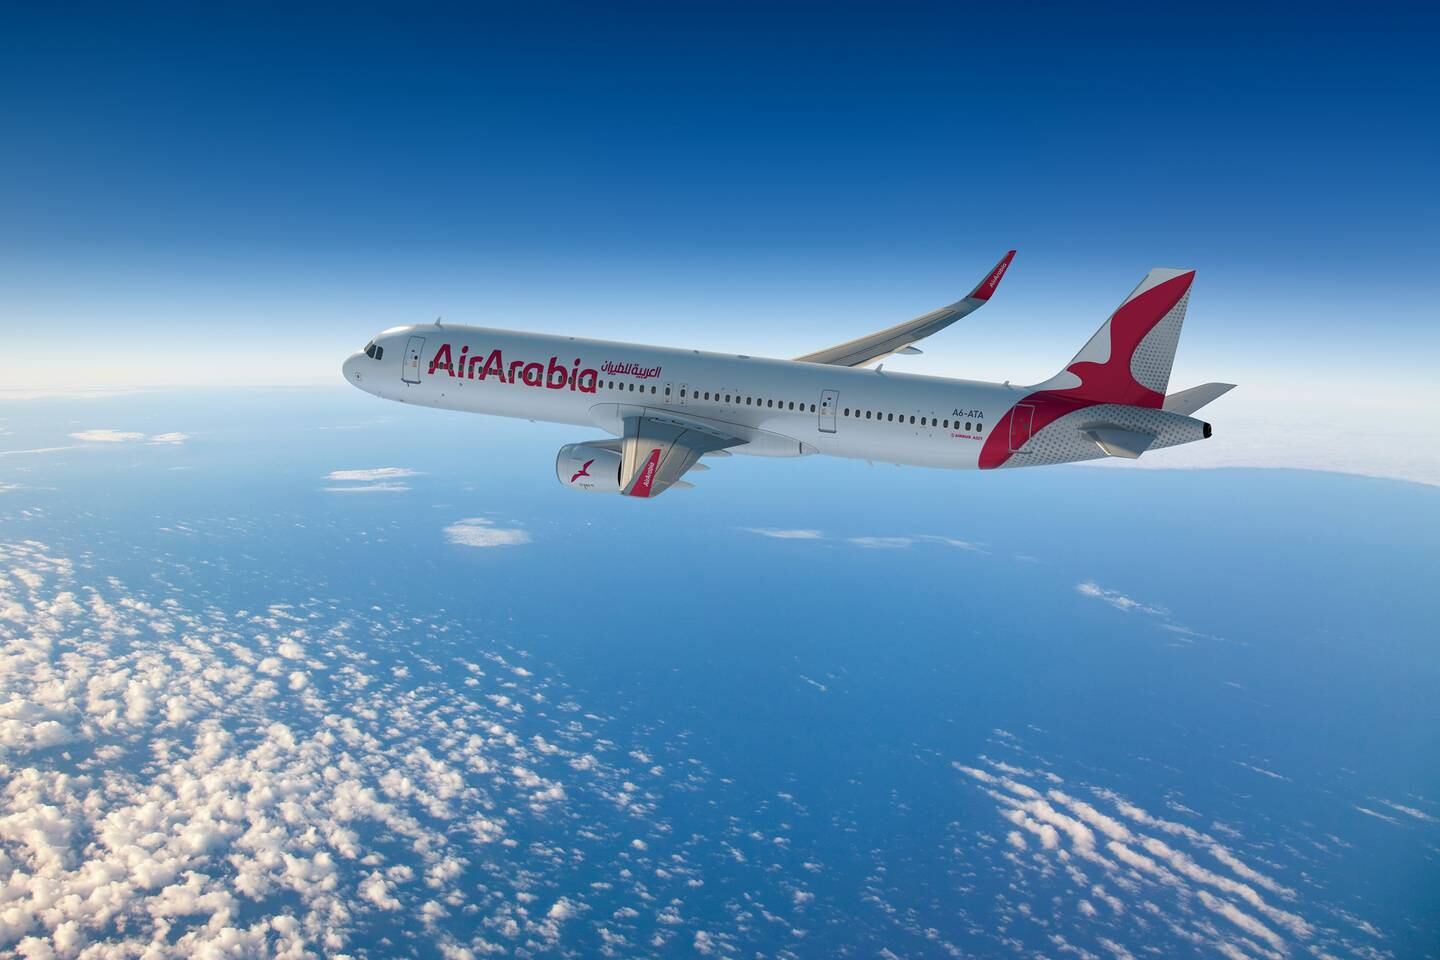 Air Arabia also secured a spot in the AirlineRatings.com ranking. Photo: Air Arabia